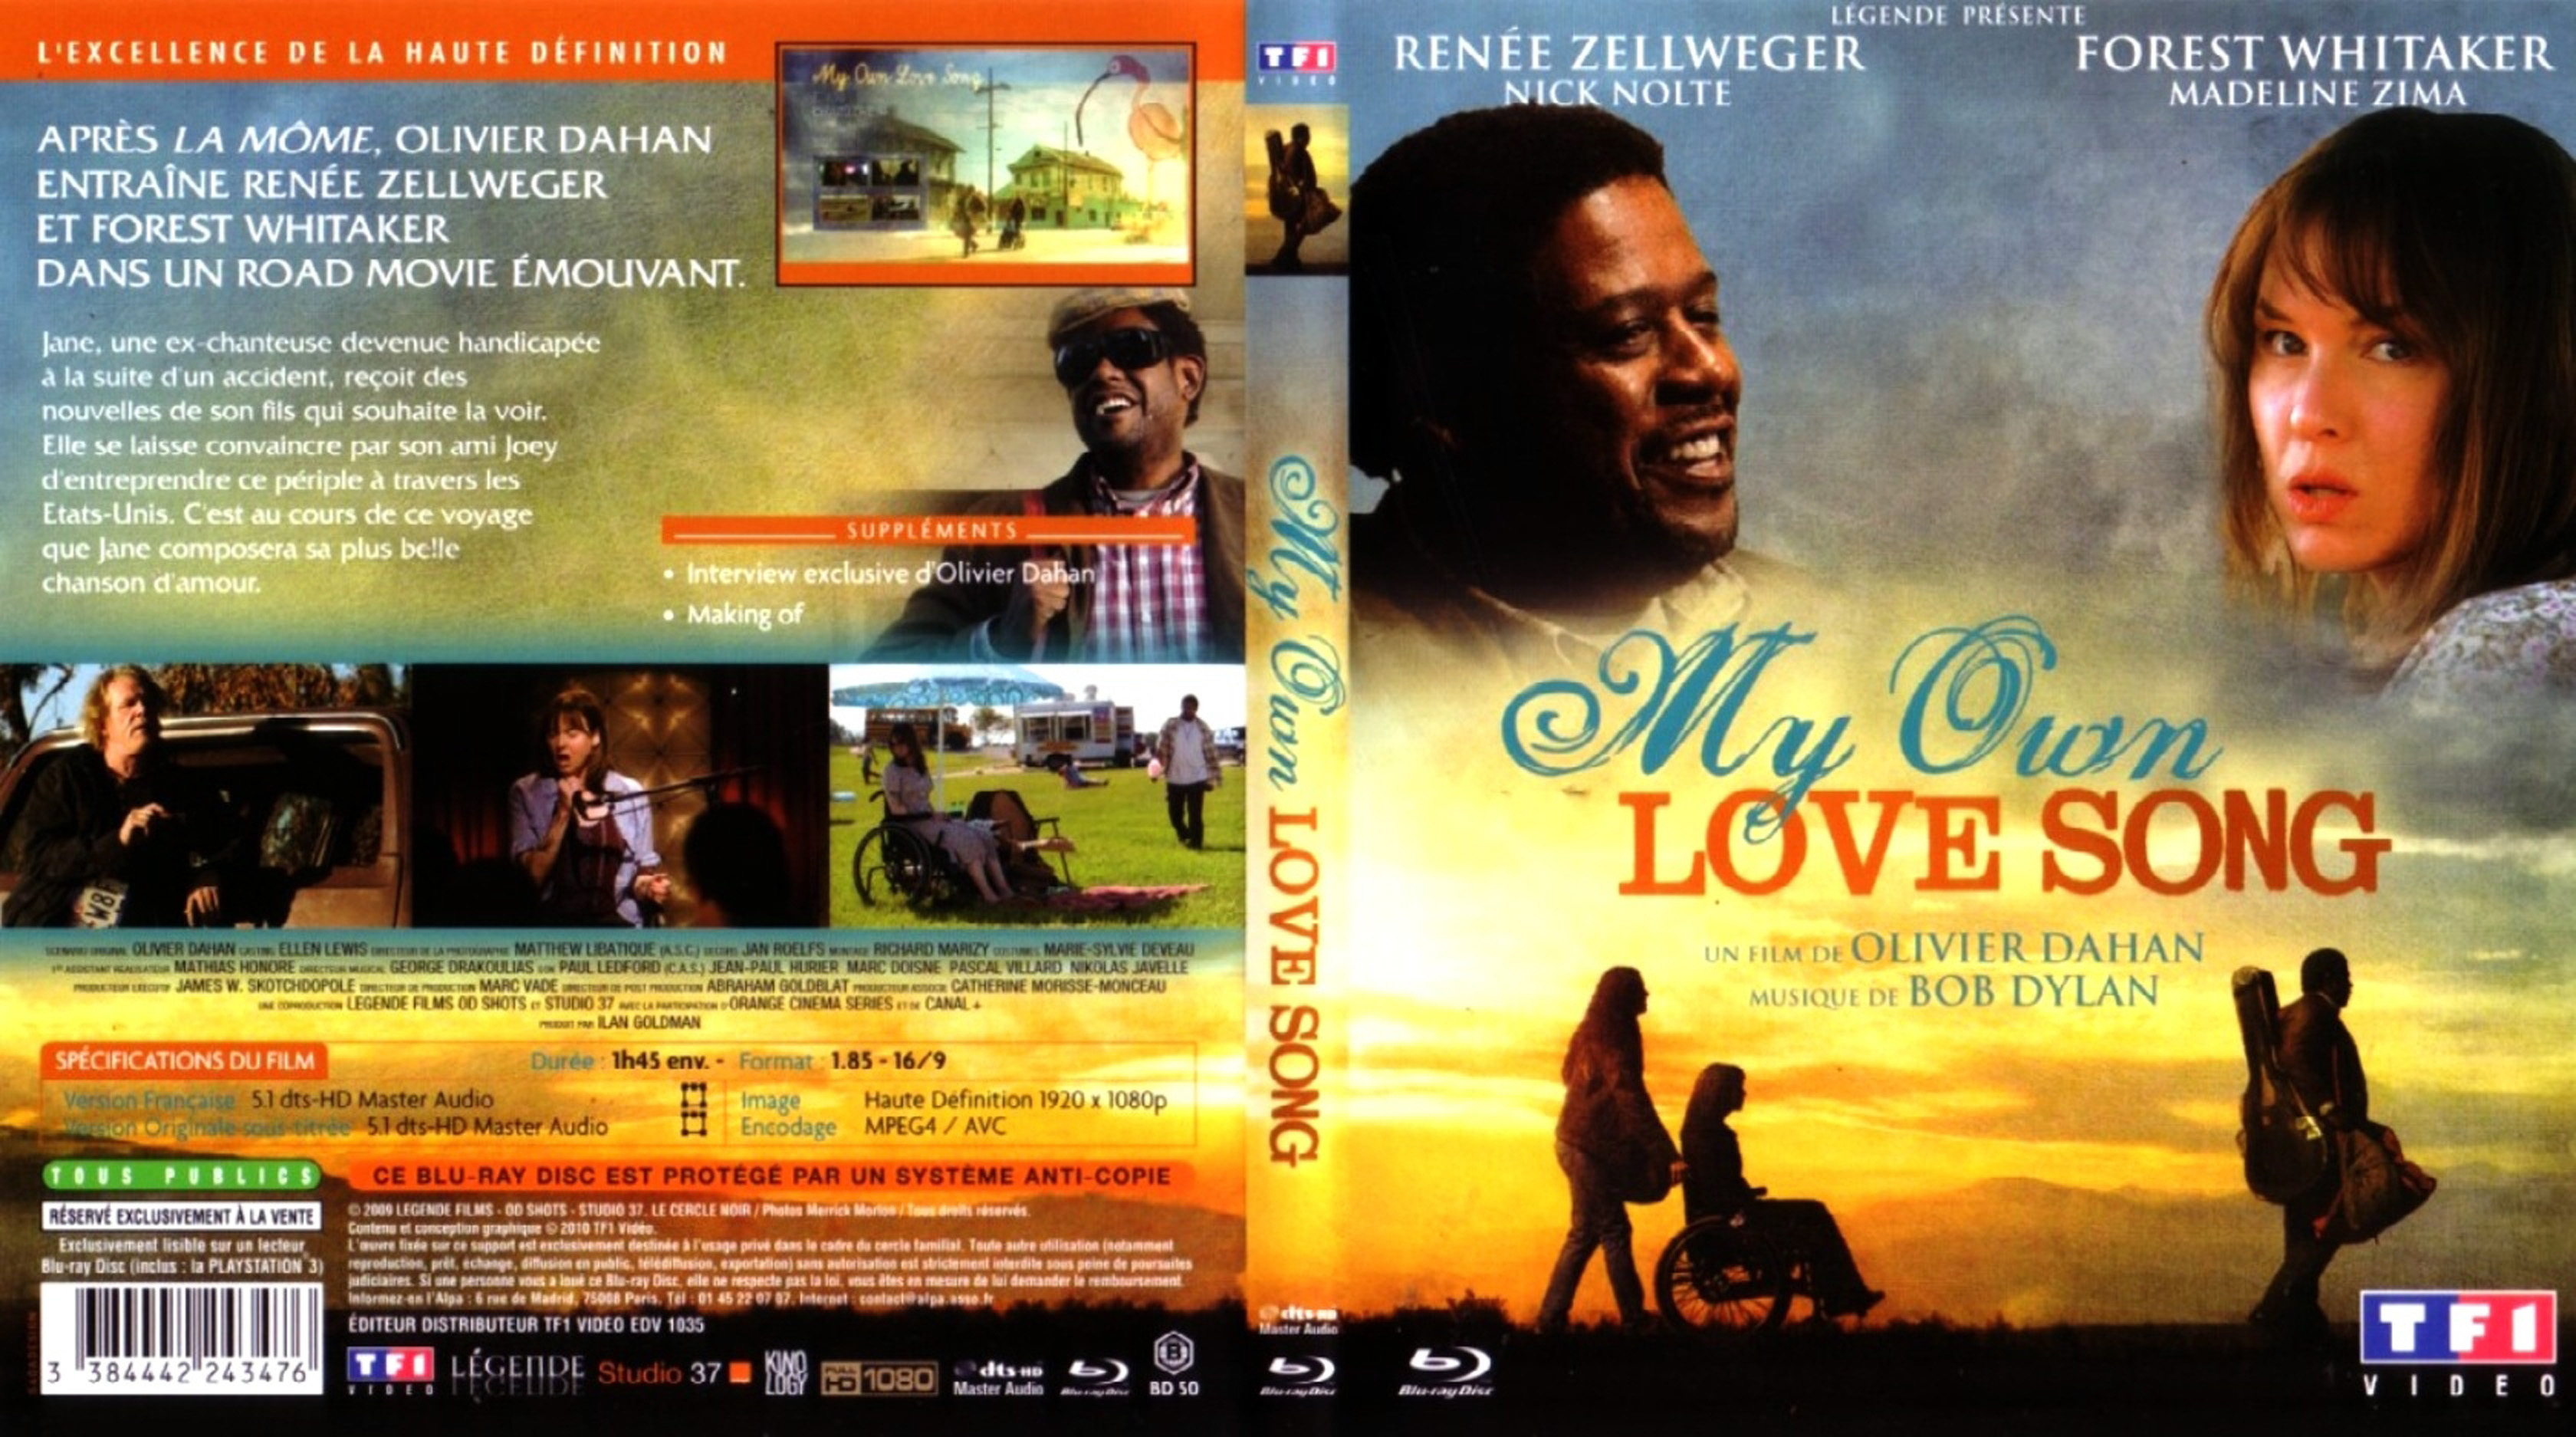 Jaquette DVD My own love song (BLU-RAY)